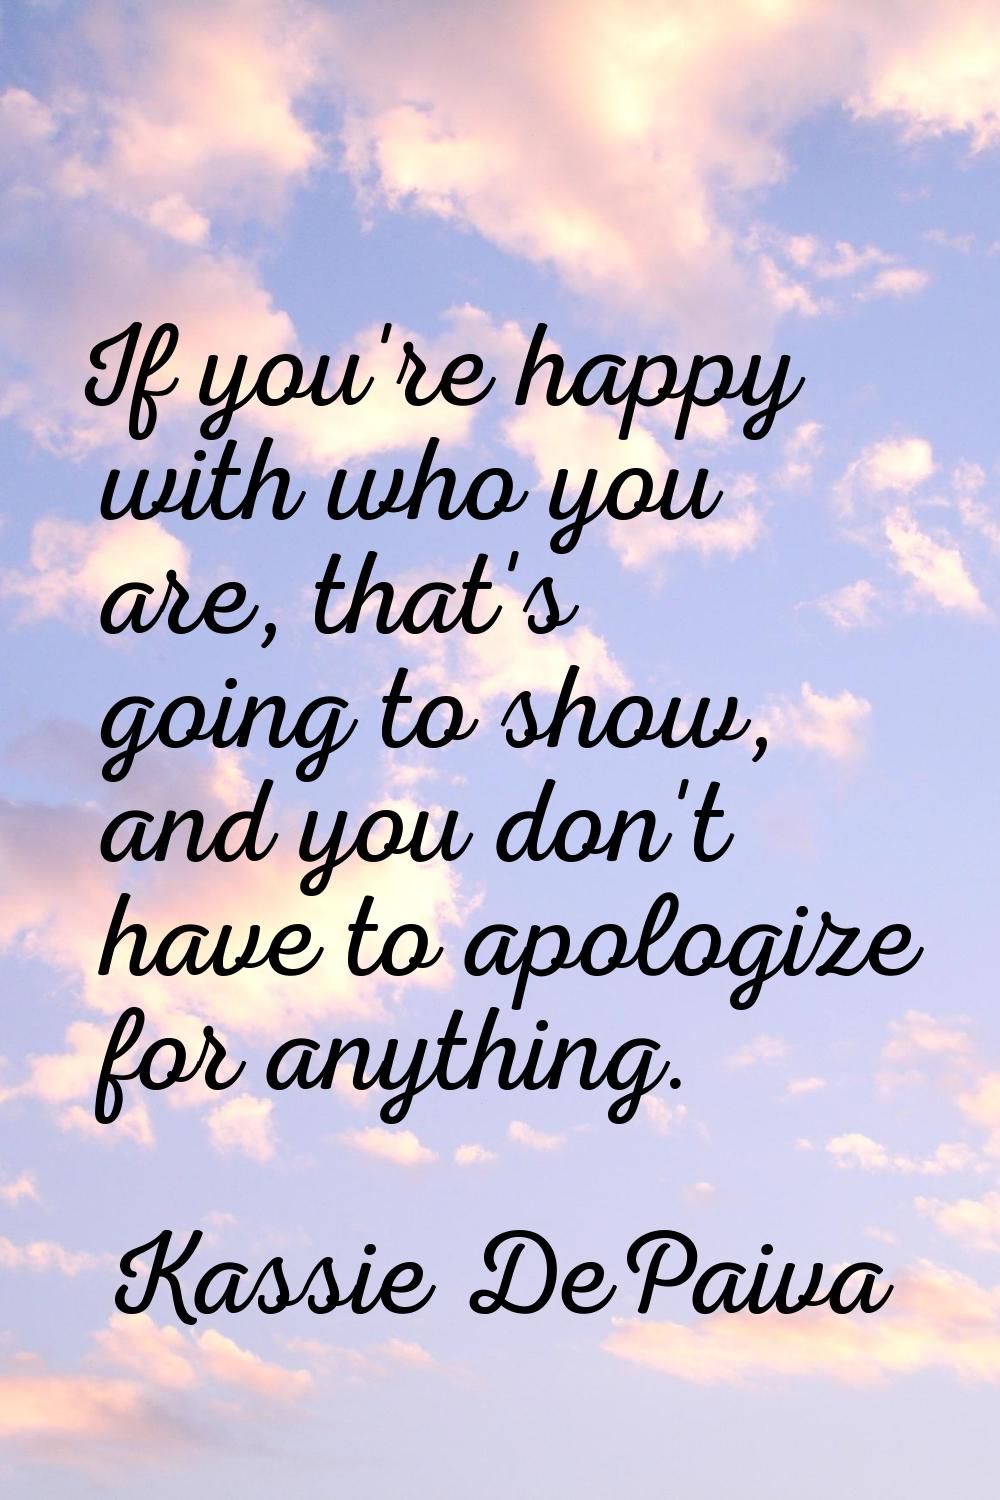 If you're happy with who you are, that's going to show, and you don't have to apologize for anythin